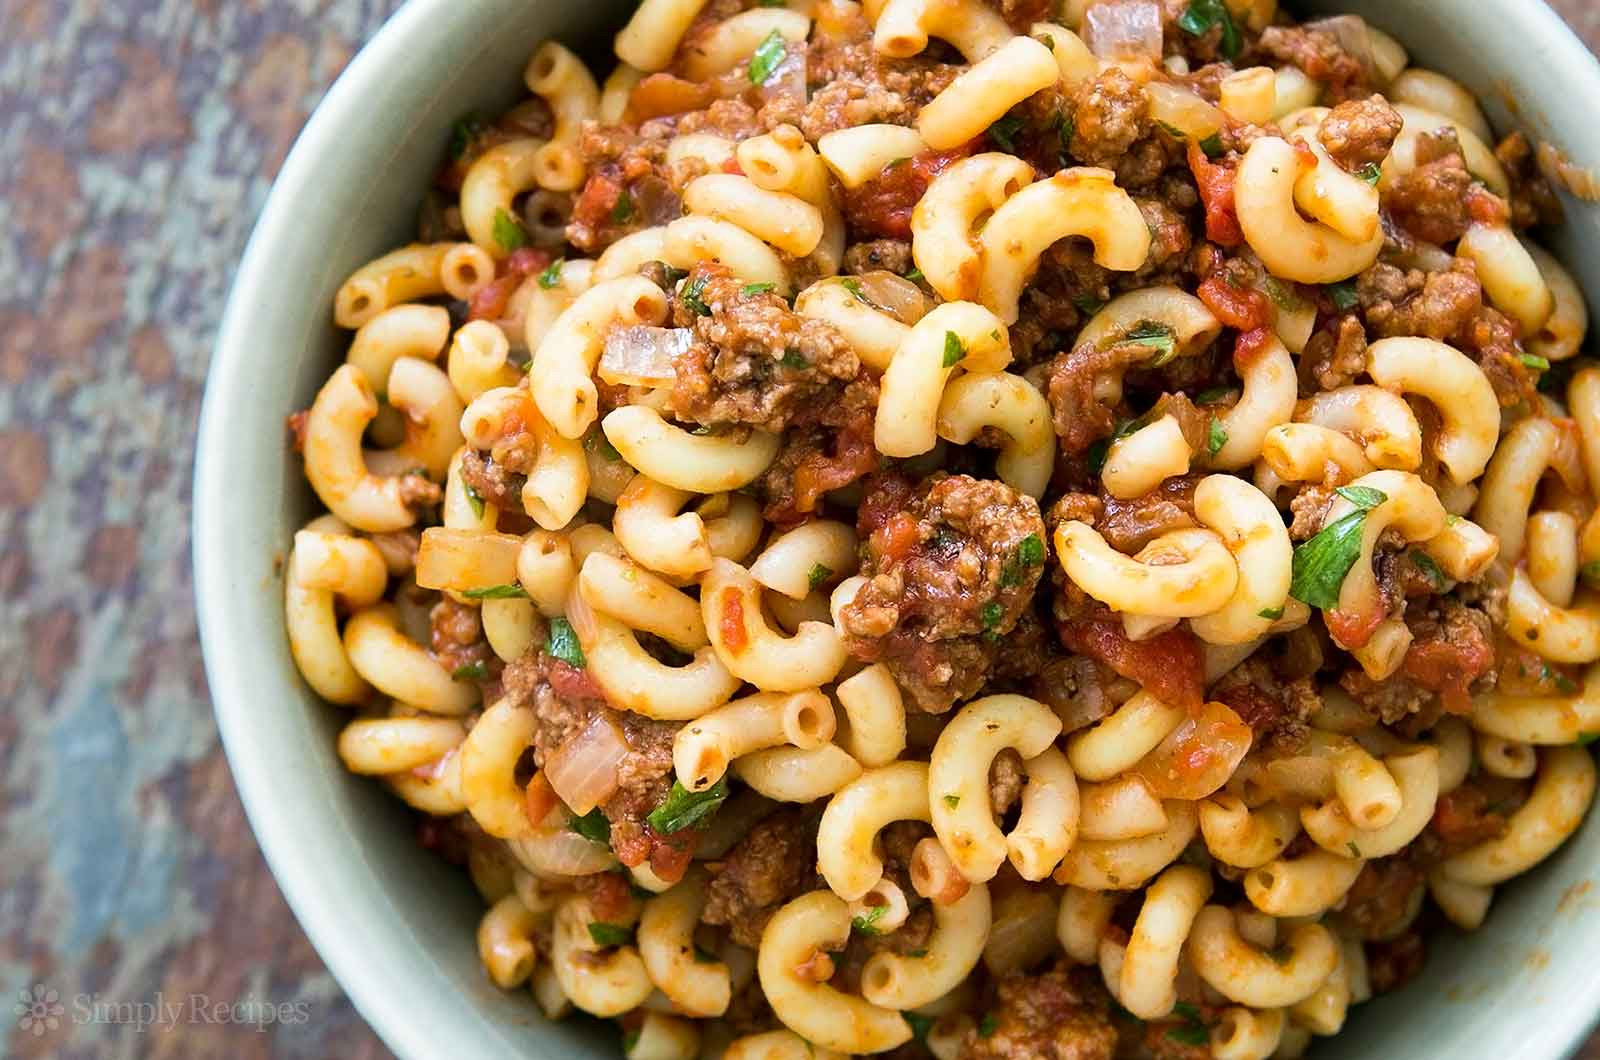 The 15 Best Ideas for Ground Beef Pasta Recipes No tomato Sauce